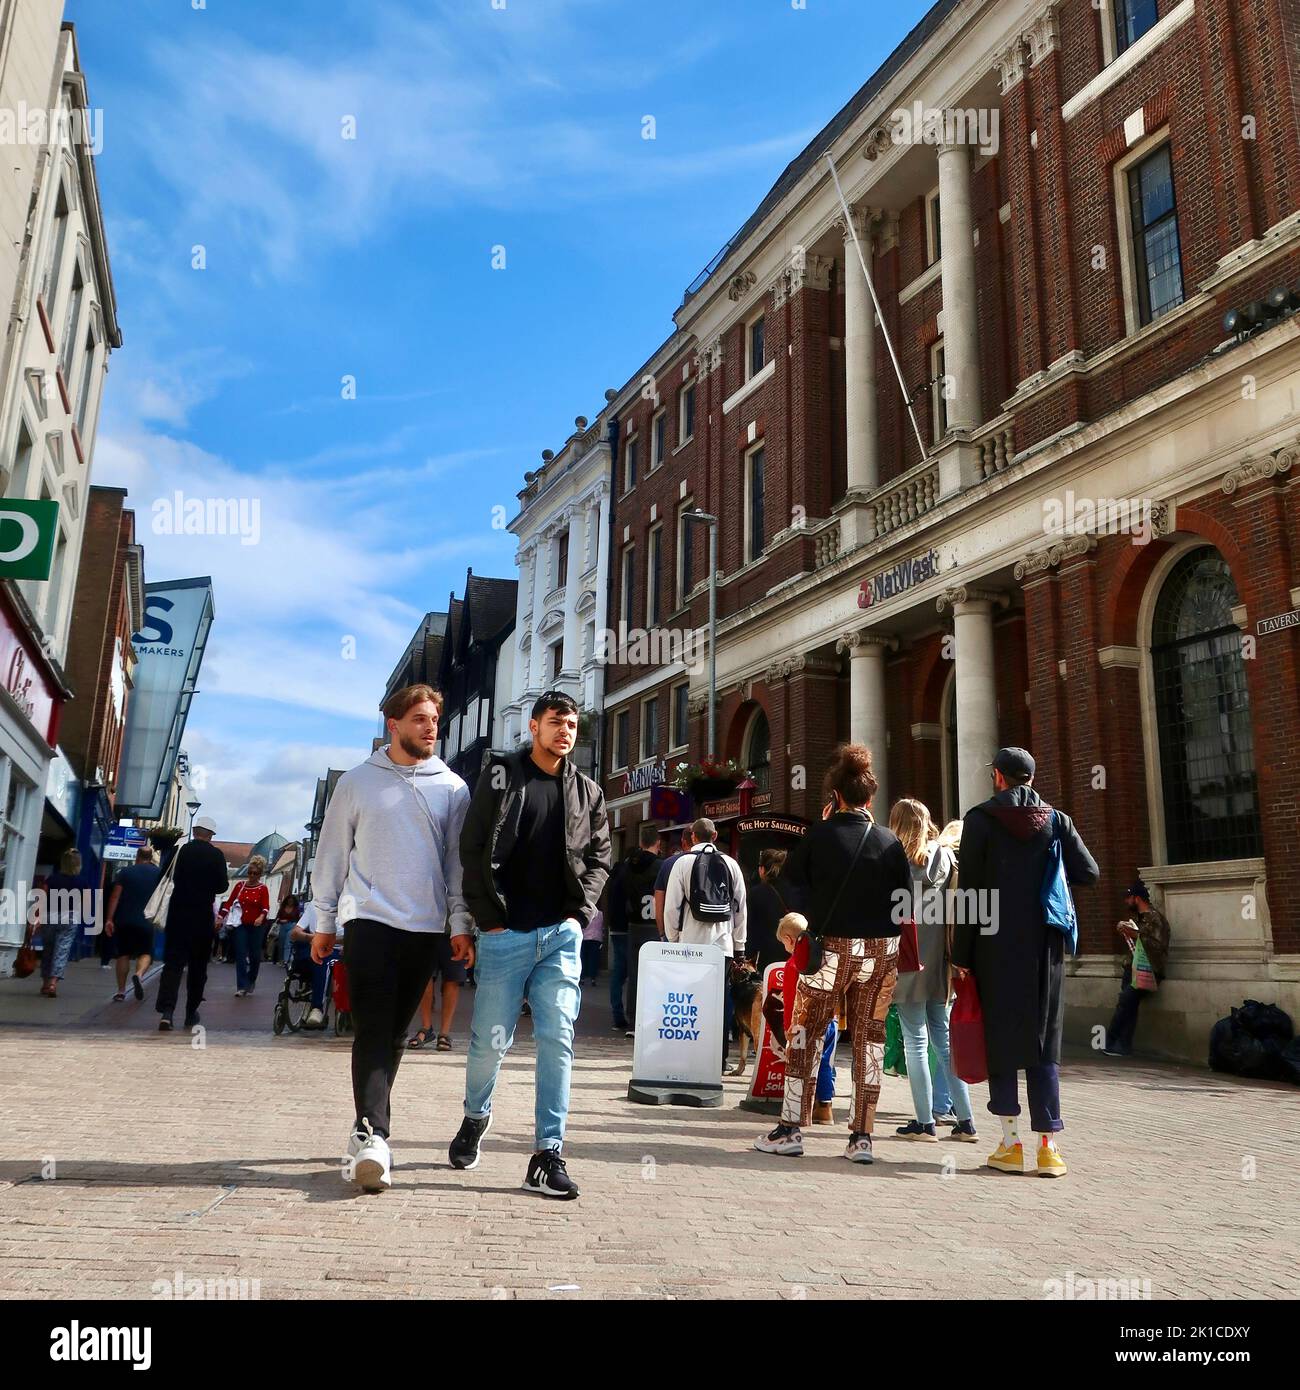 Ipswich, Suffolk, UK - 17 September 2022 : Shoppers walking through the town centre on a bright Saturday afternoon. Stock Photo